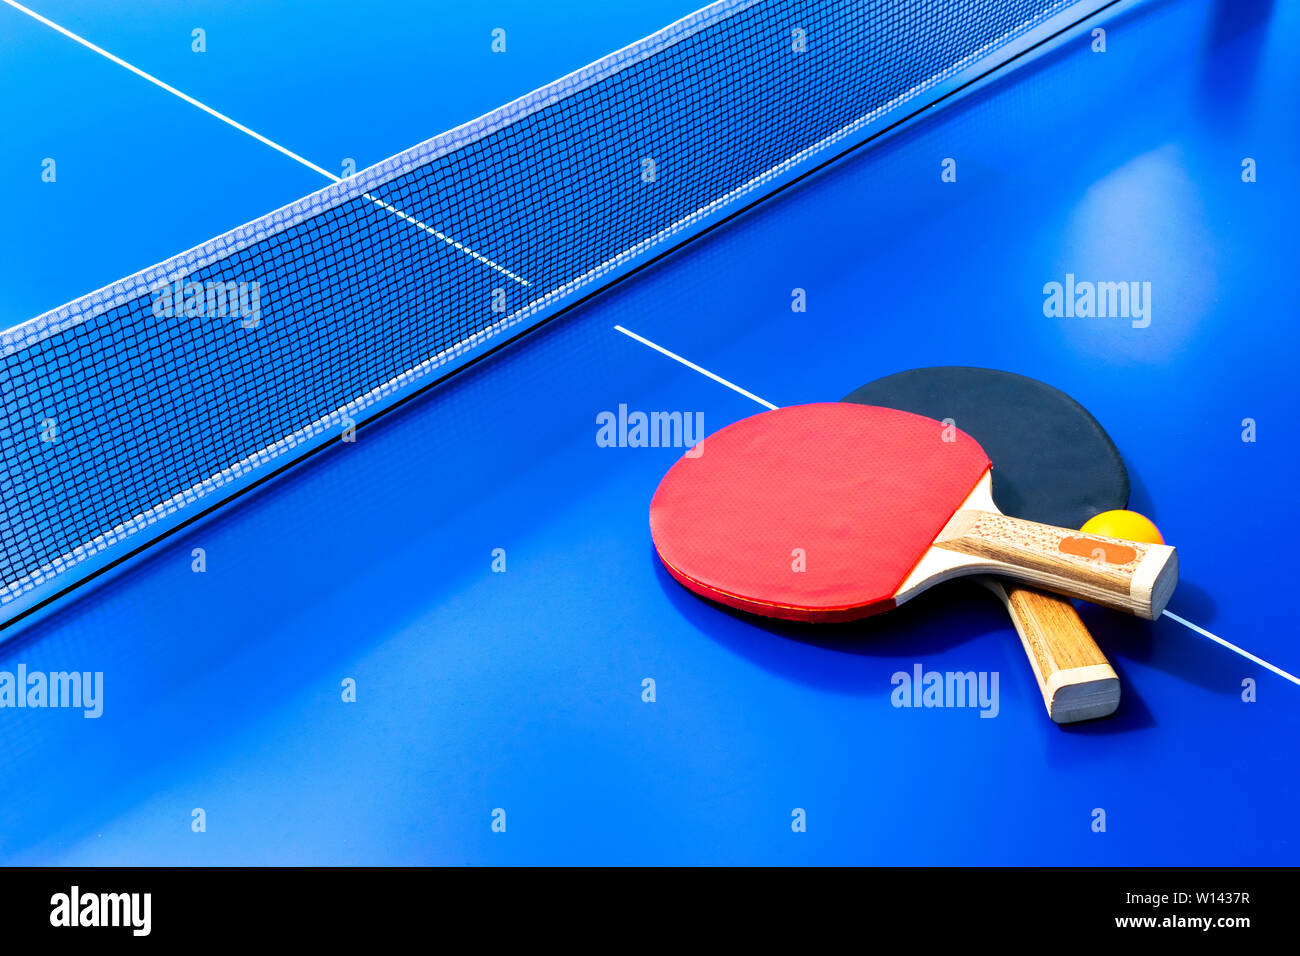 Blue table tennis or ping pong. Close-up ping-pong net. Close up ping pong net and line. Two table tennis or ping pong rackets or paddles  and ball on Stock Photo